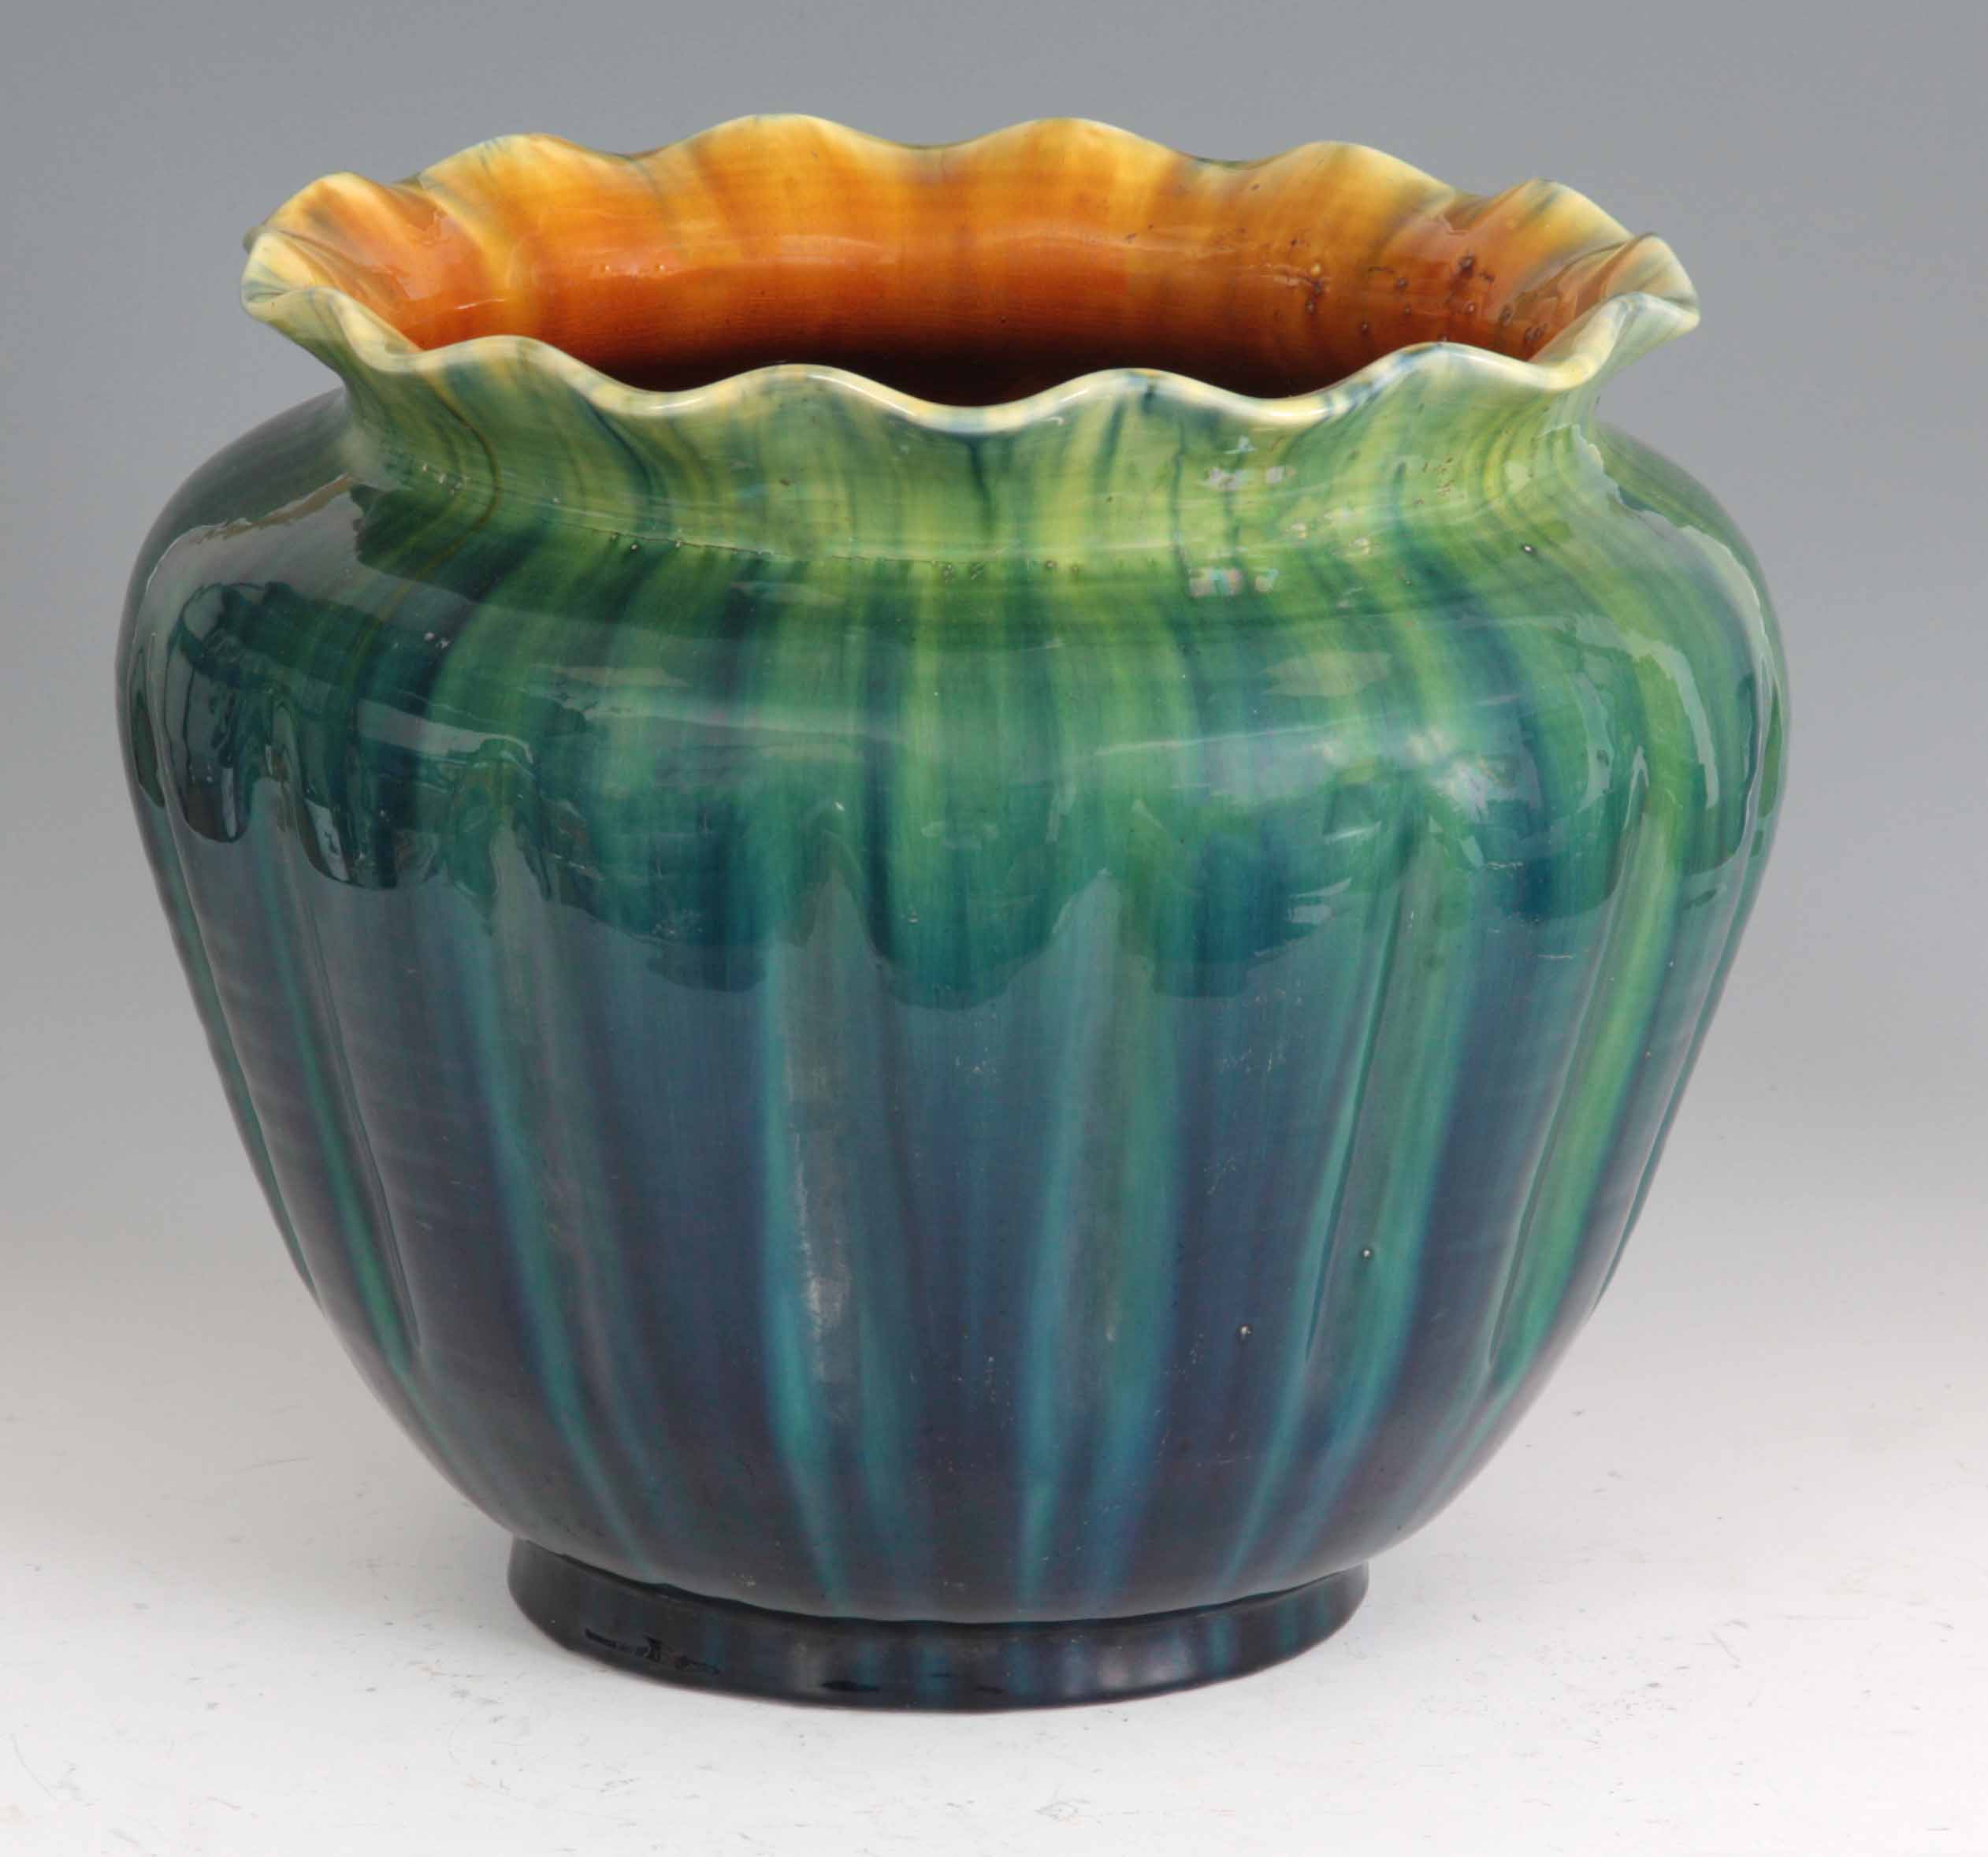 A LARGE EARLY 20th CENTURY LINTHORPE POTTERY JARDINIÈRE with green and orange glaze, ribbed body and